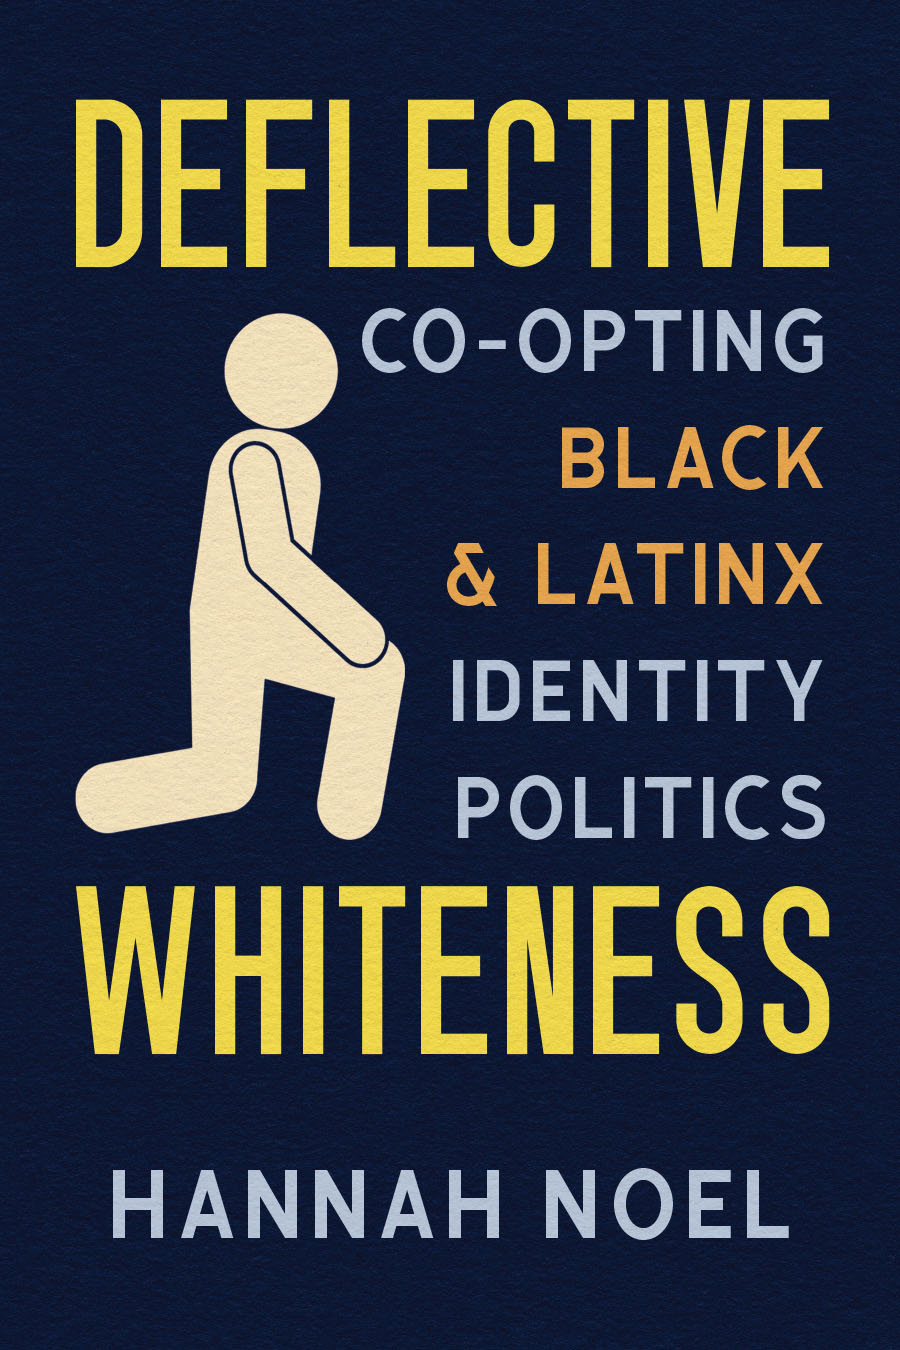 Deflective Whitenessbook cover